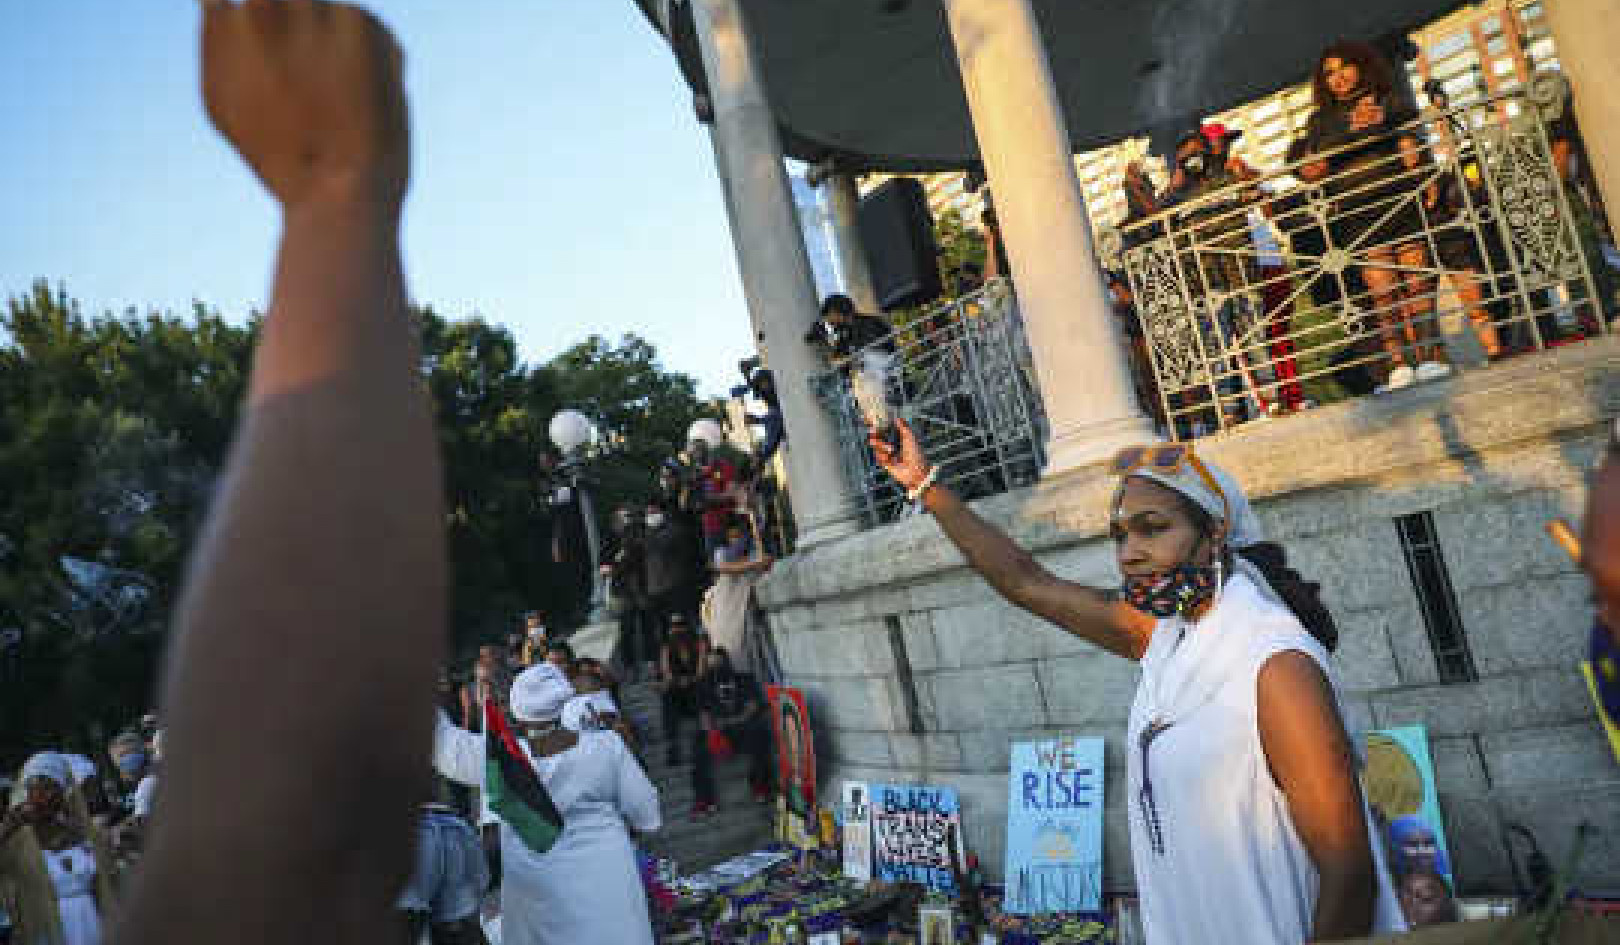 Far From Being Anti-Religious, Faith and Spirituality Run Deep In Black Lives Matter